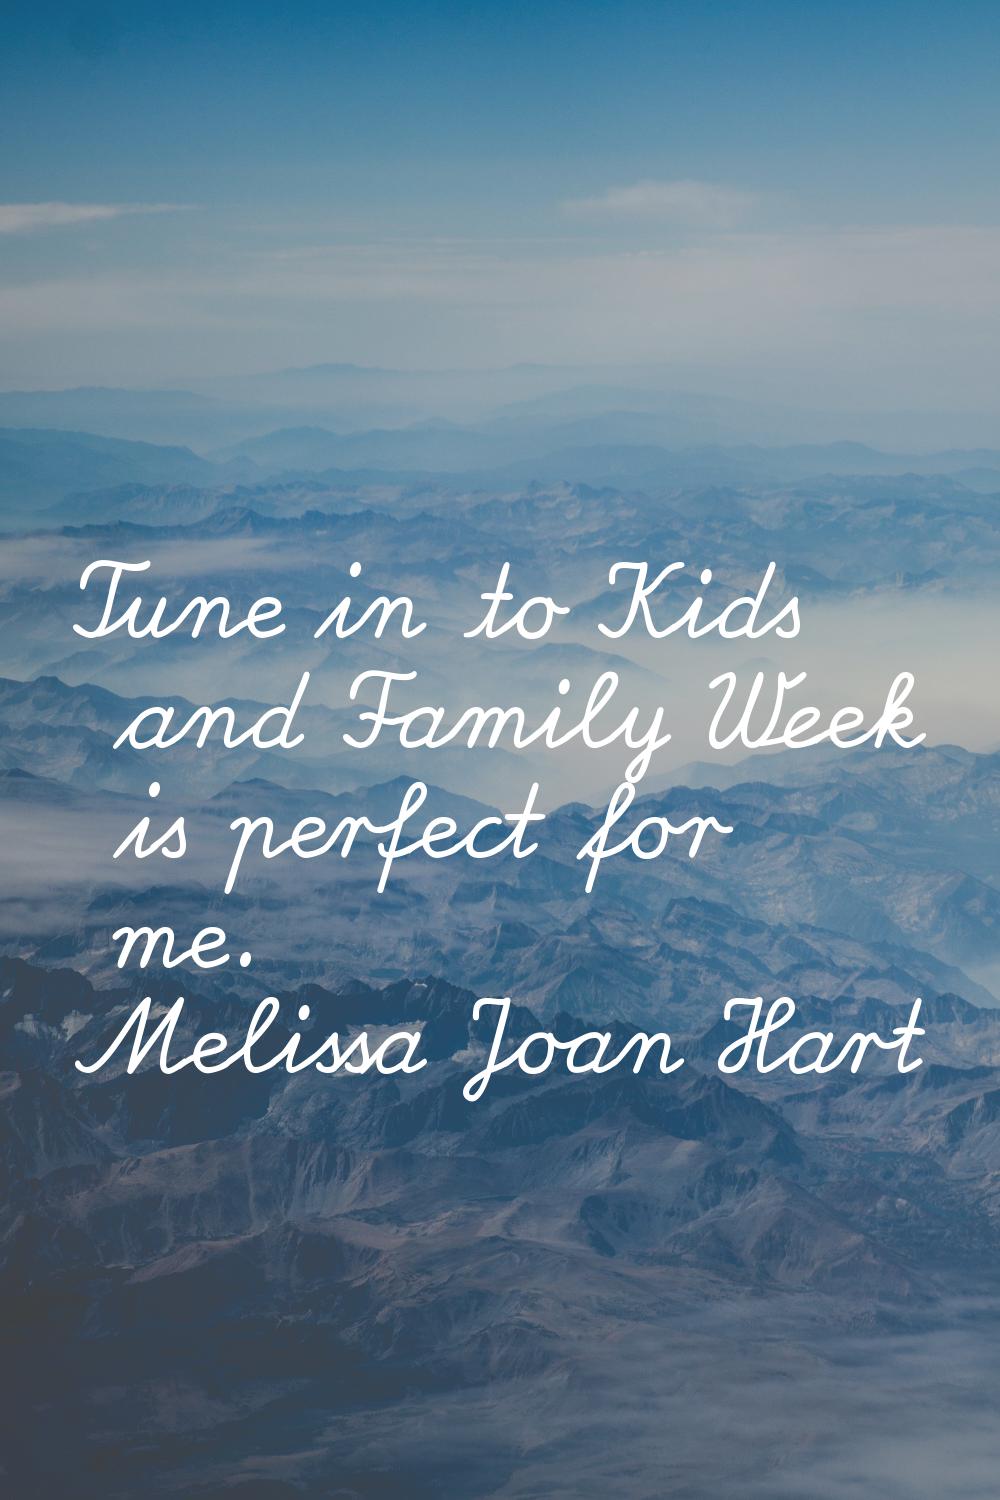 Tune in to Kids and Family Week is perfect for me.